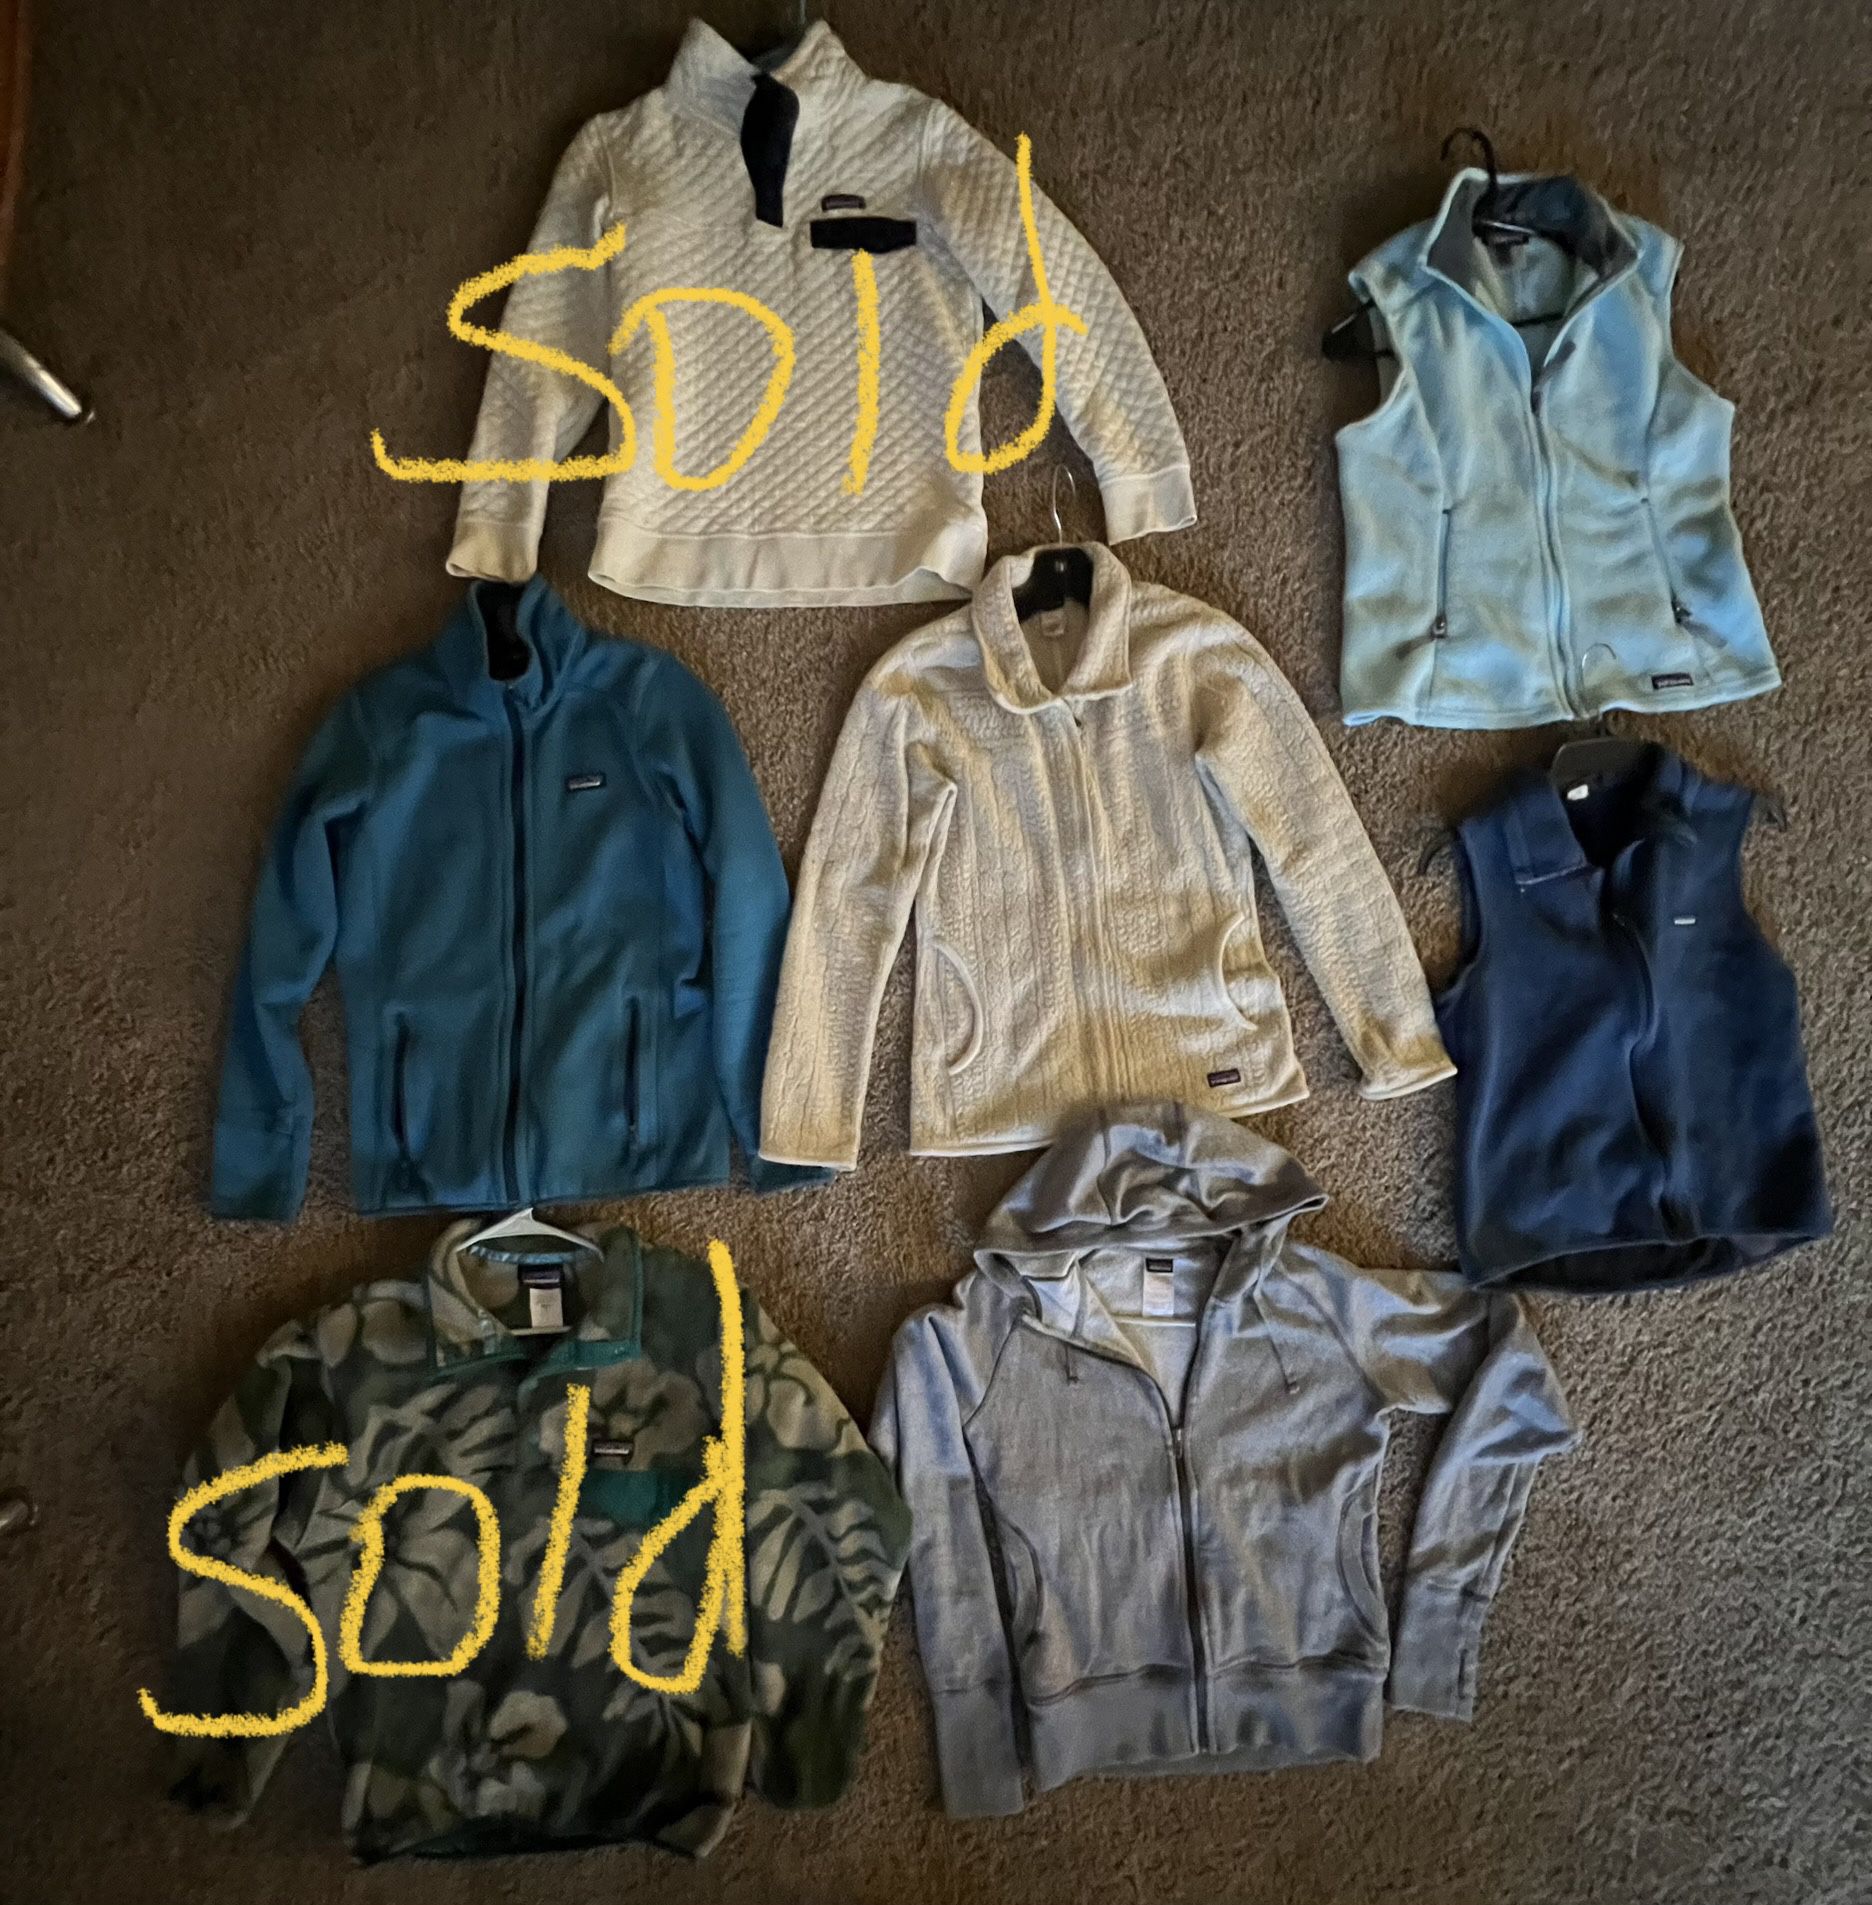 patagonia jackets and vest different sizes and different prices, good conditions payments by zelle or paypal plus shipping